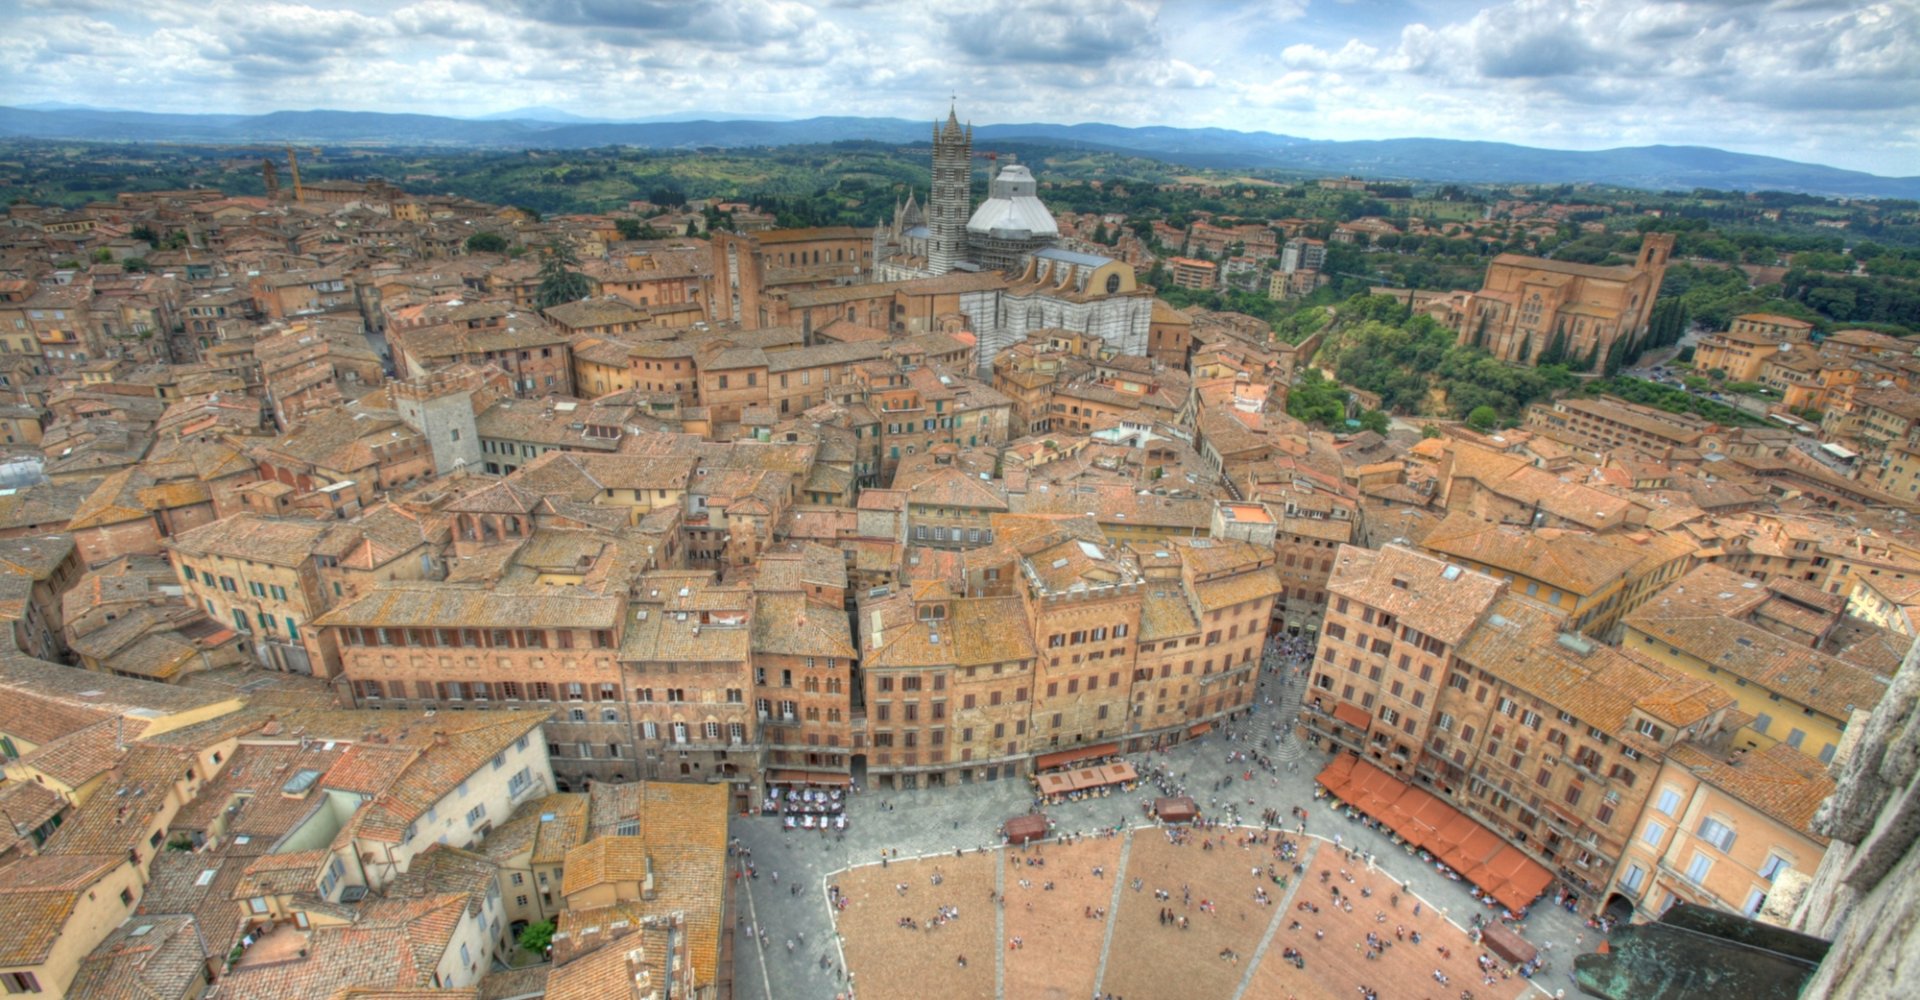 The view from the Torre del Mangia in Siena